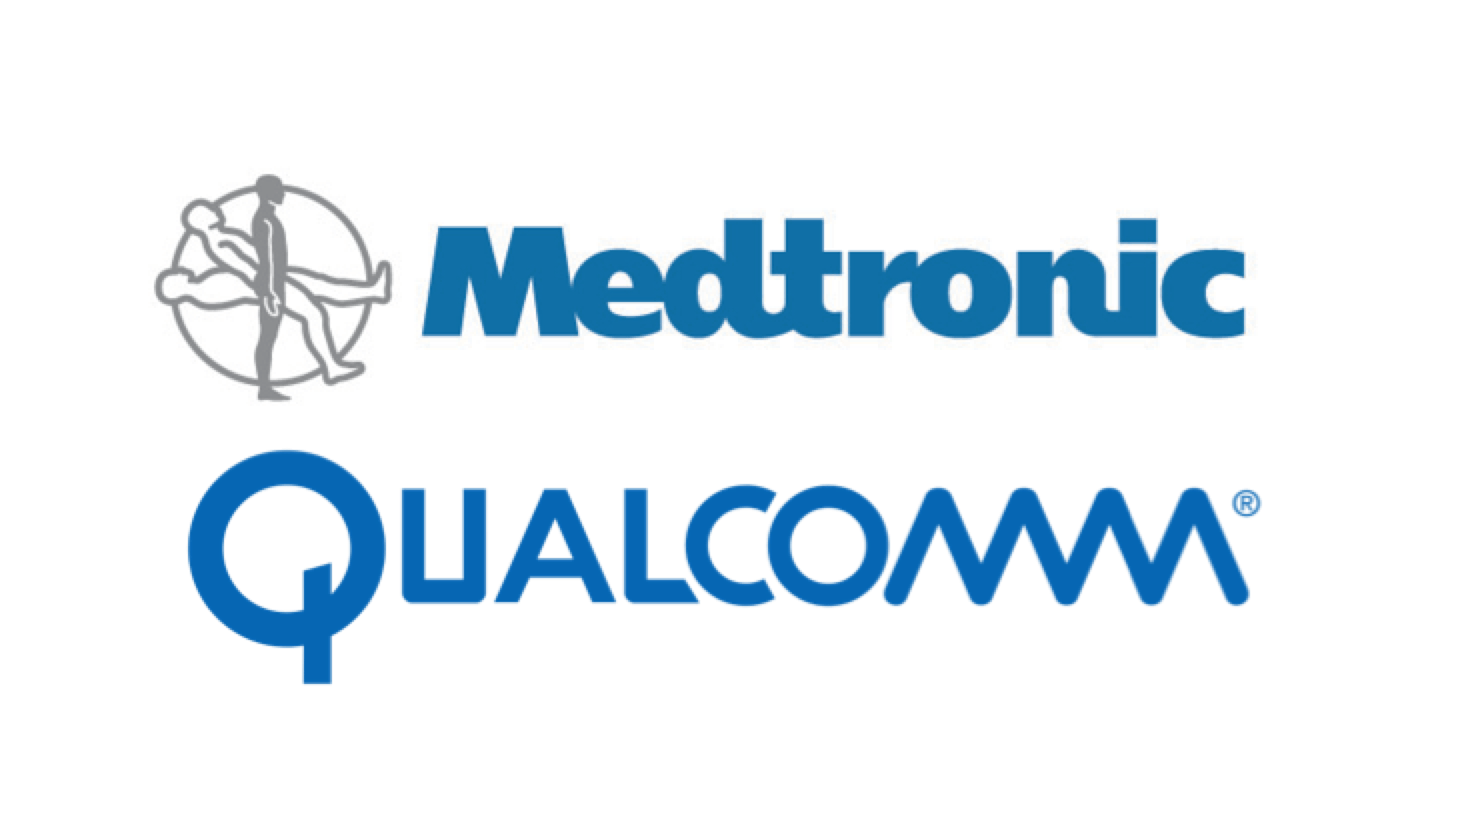 Qualcomm Logo - Medtronic and Qualcomm Partner To Develop Fully Disposable ...